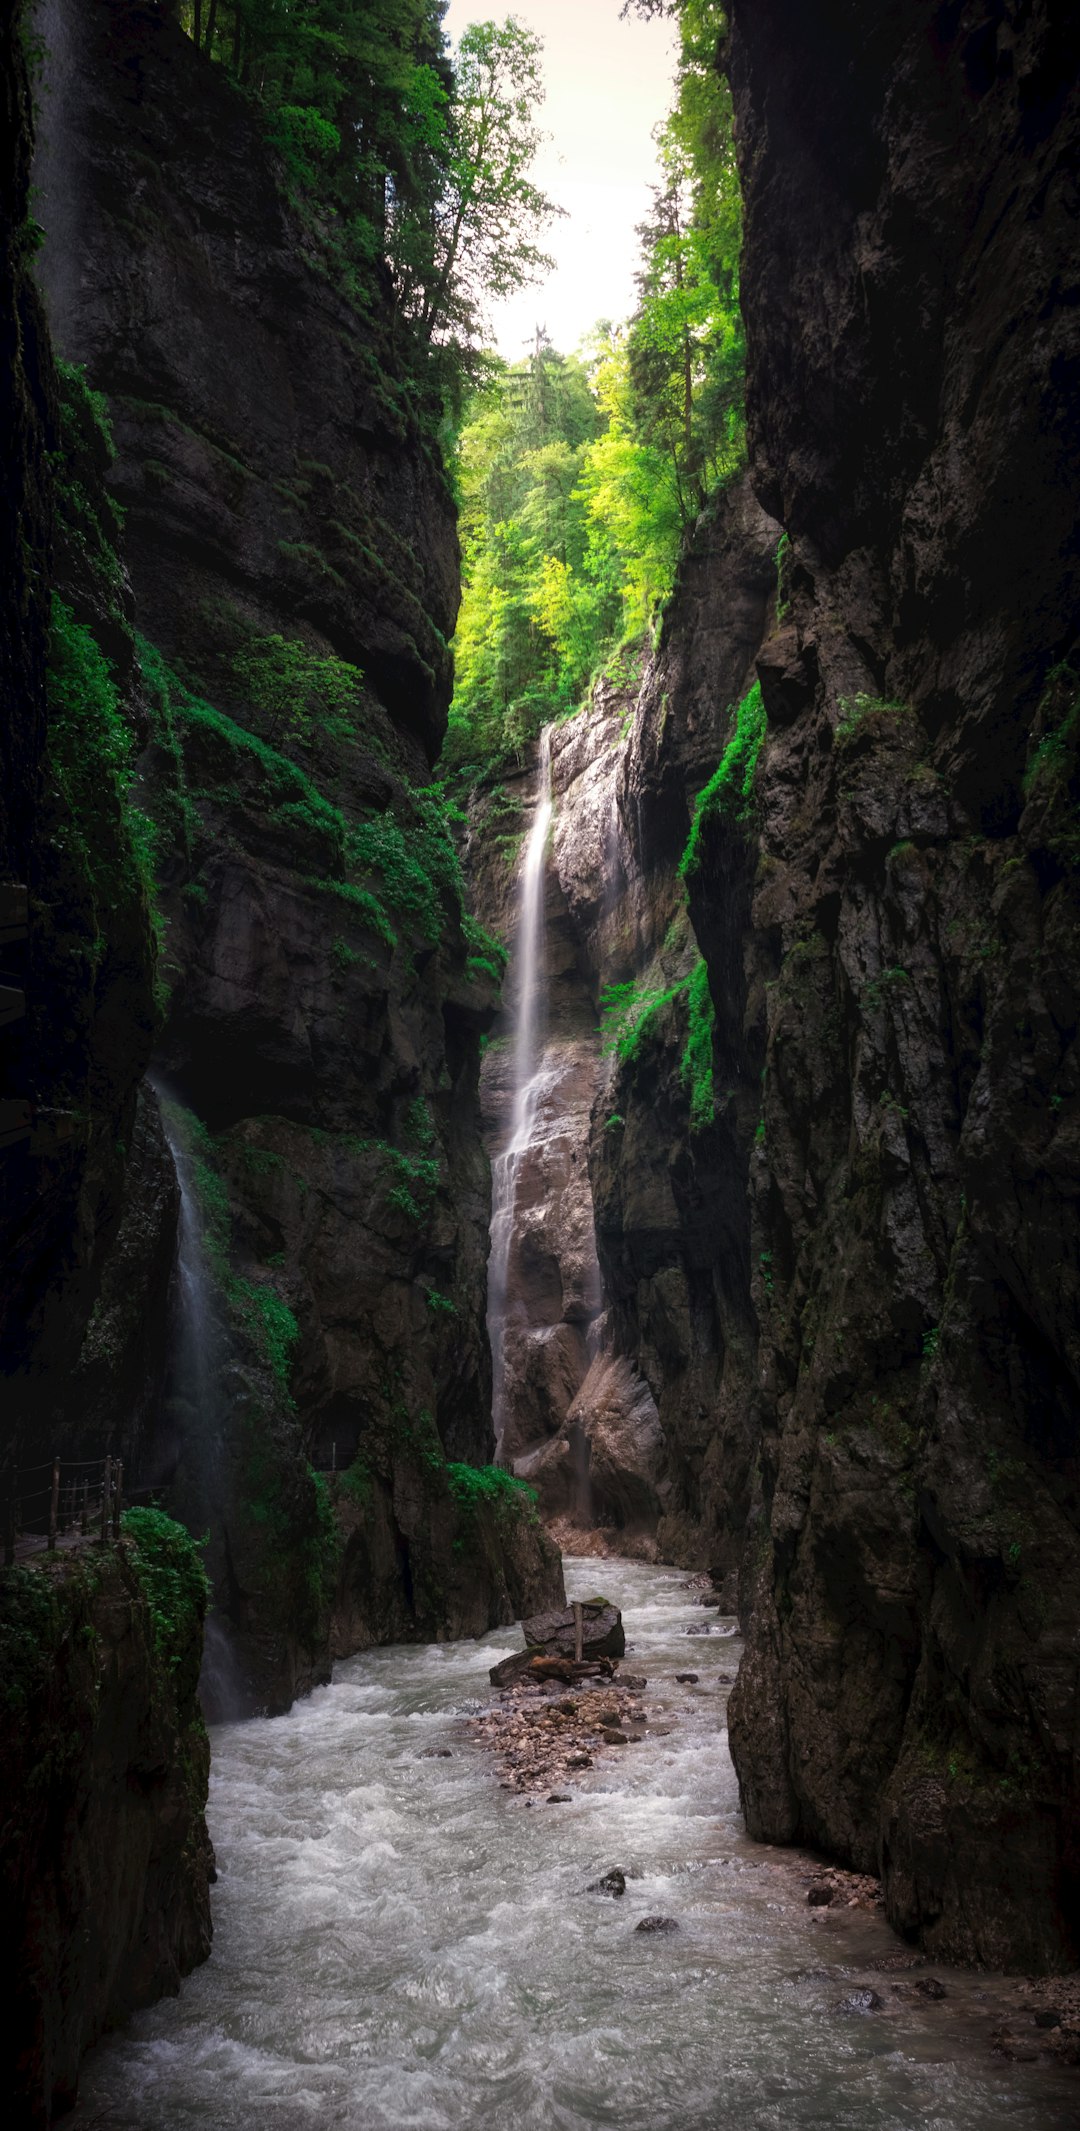 travelers stories about Waterfall in Partnachklamm, Germany